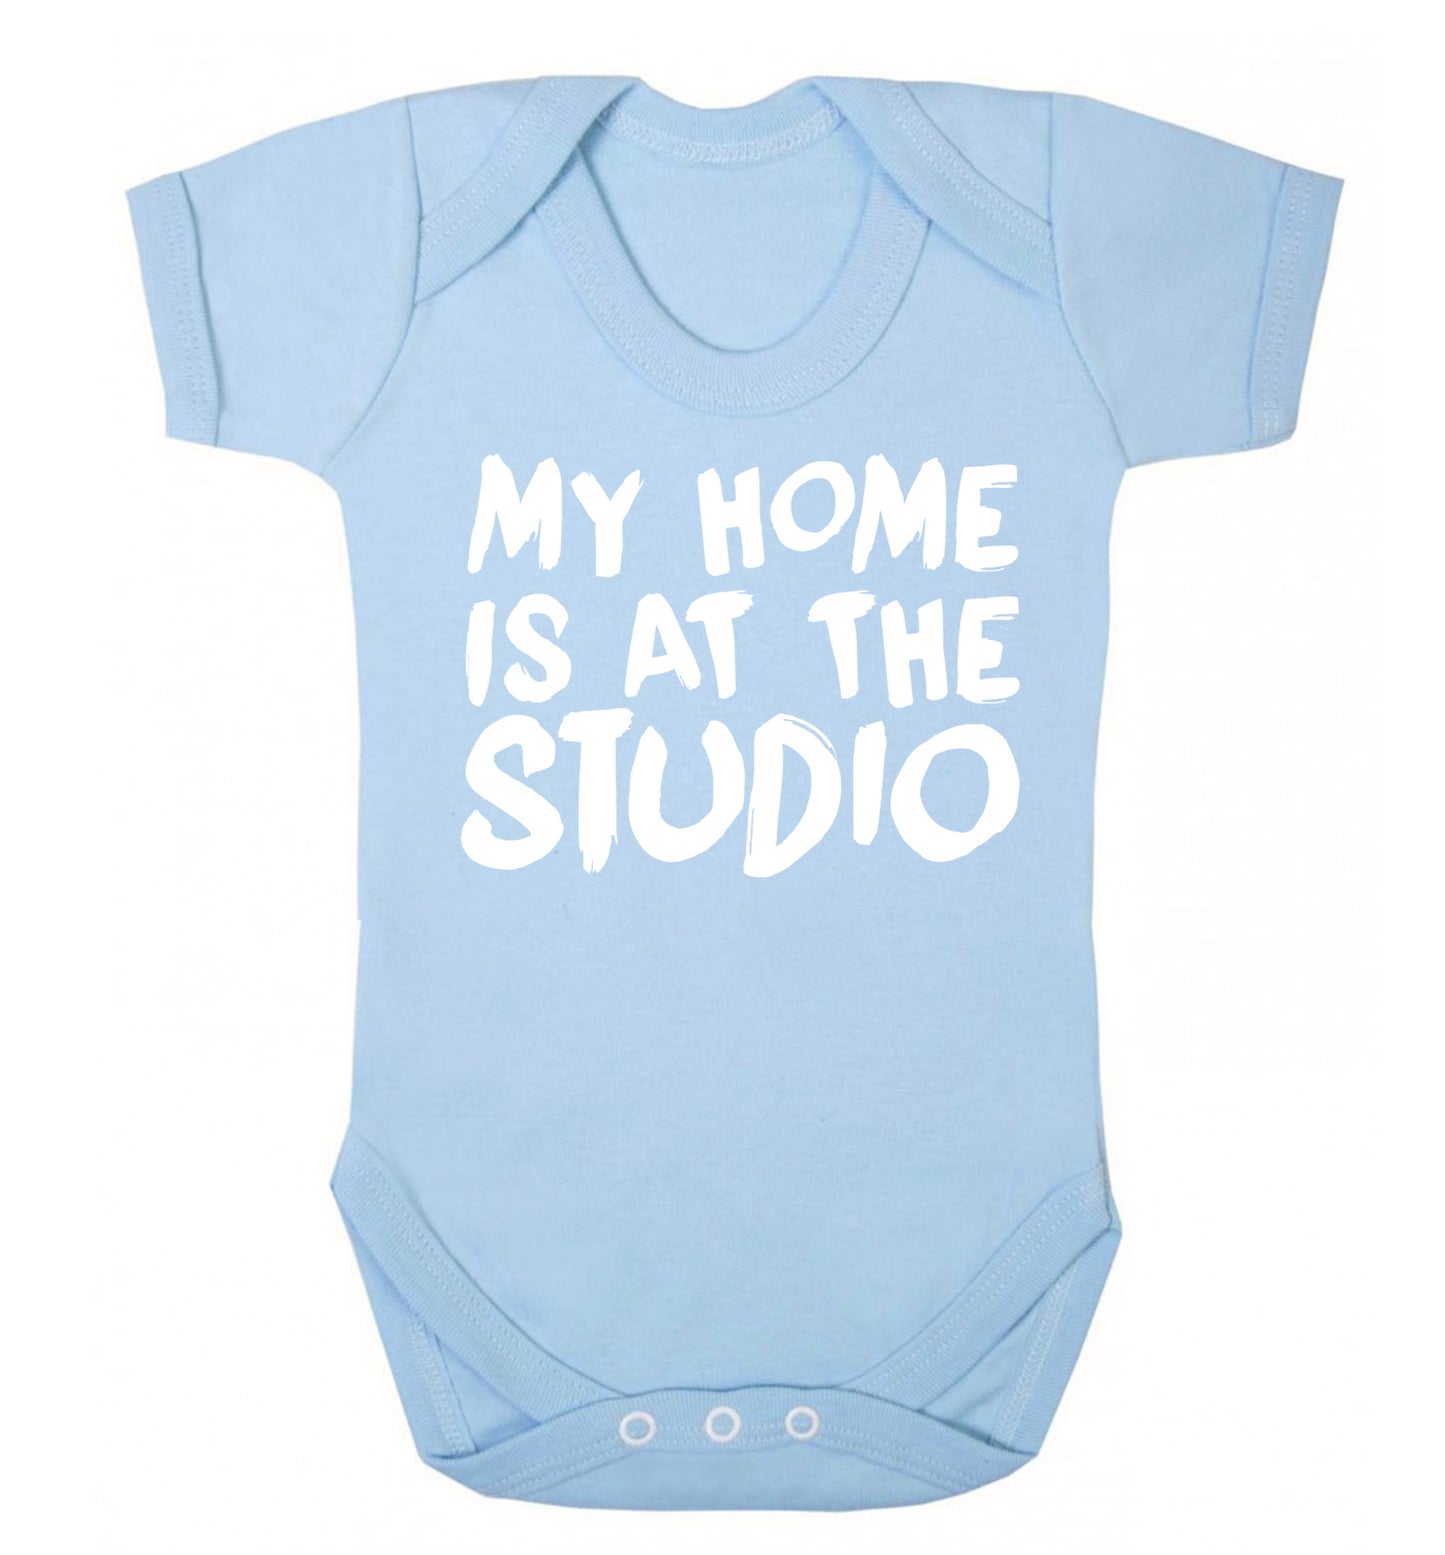 My home is at the studio Baby Vest pale blue 18-24 months